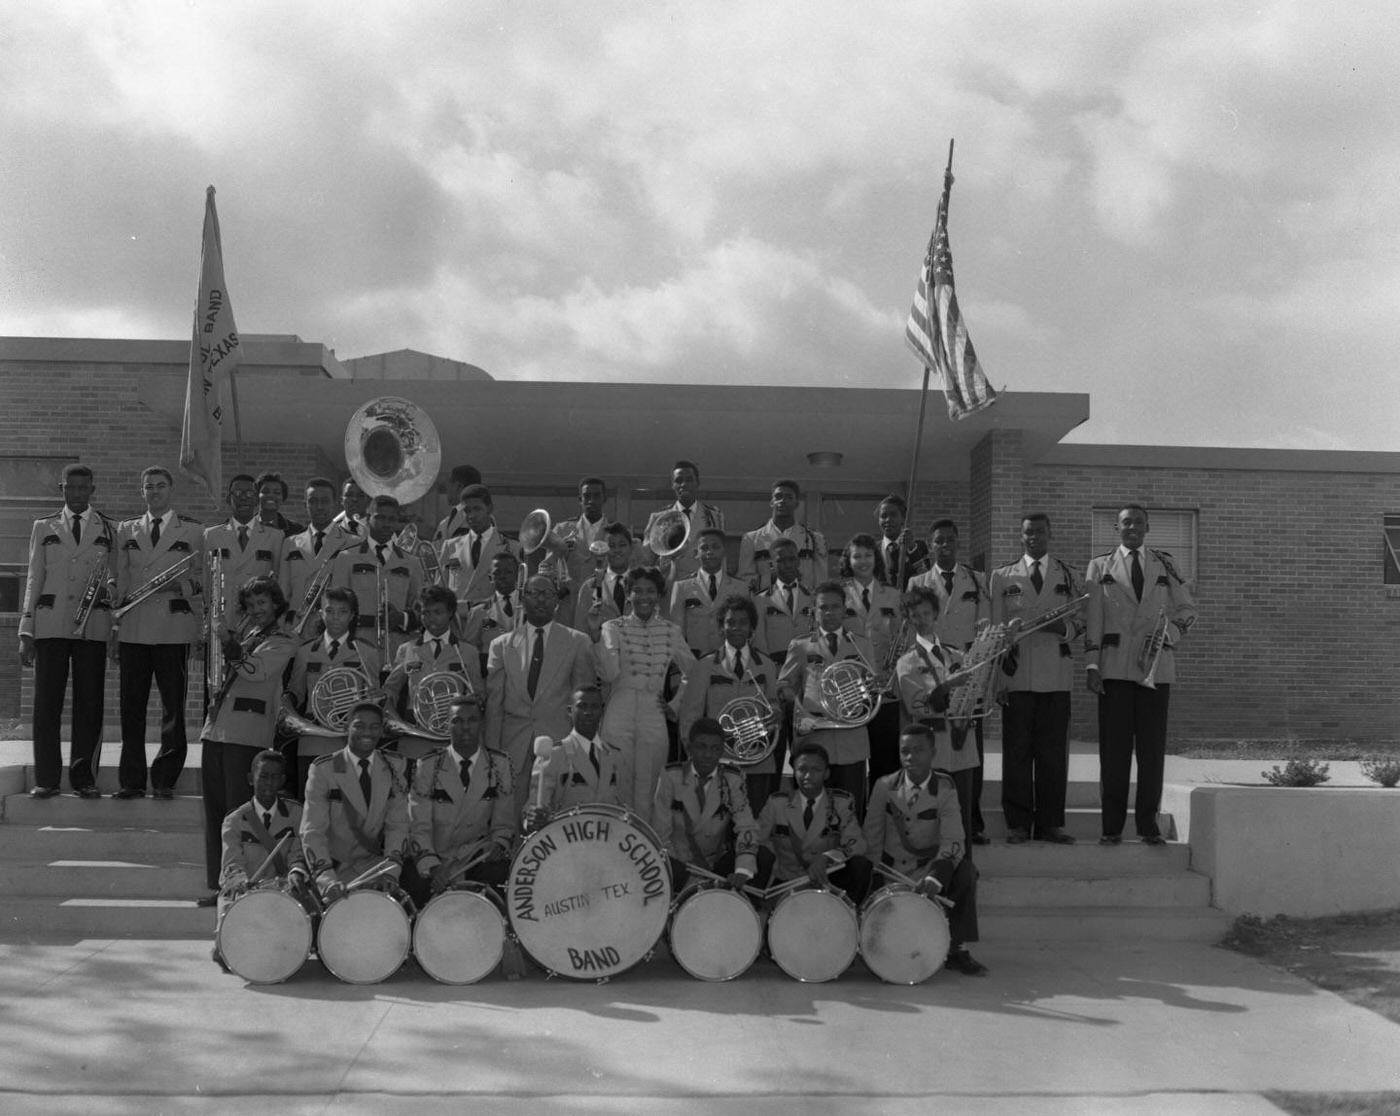 Anderson High School Band Group Portrait, 1955.